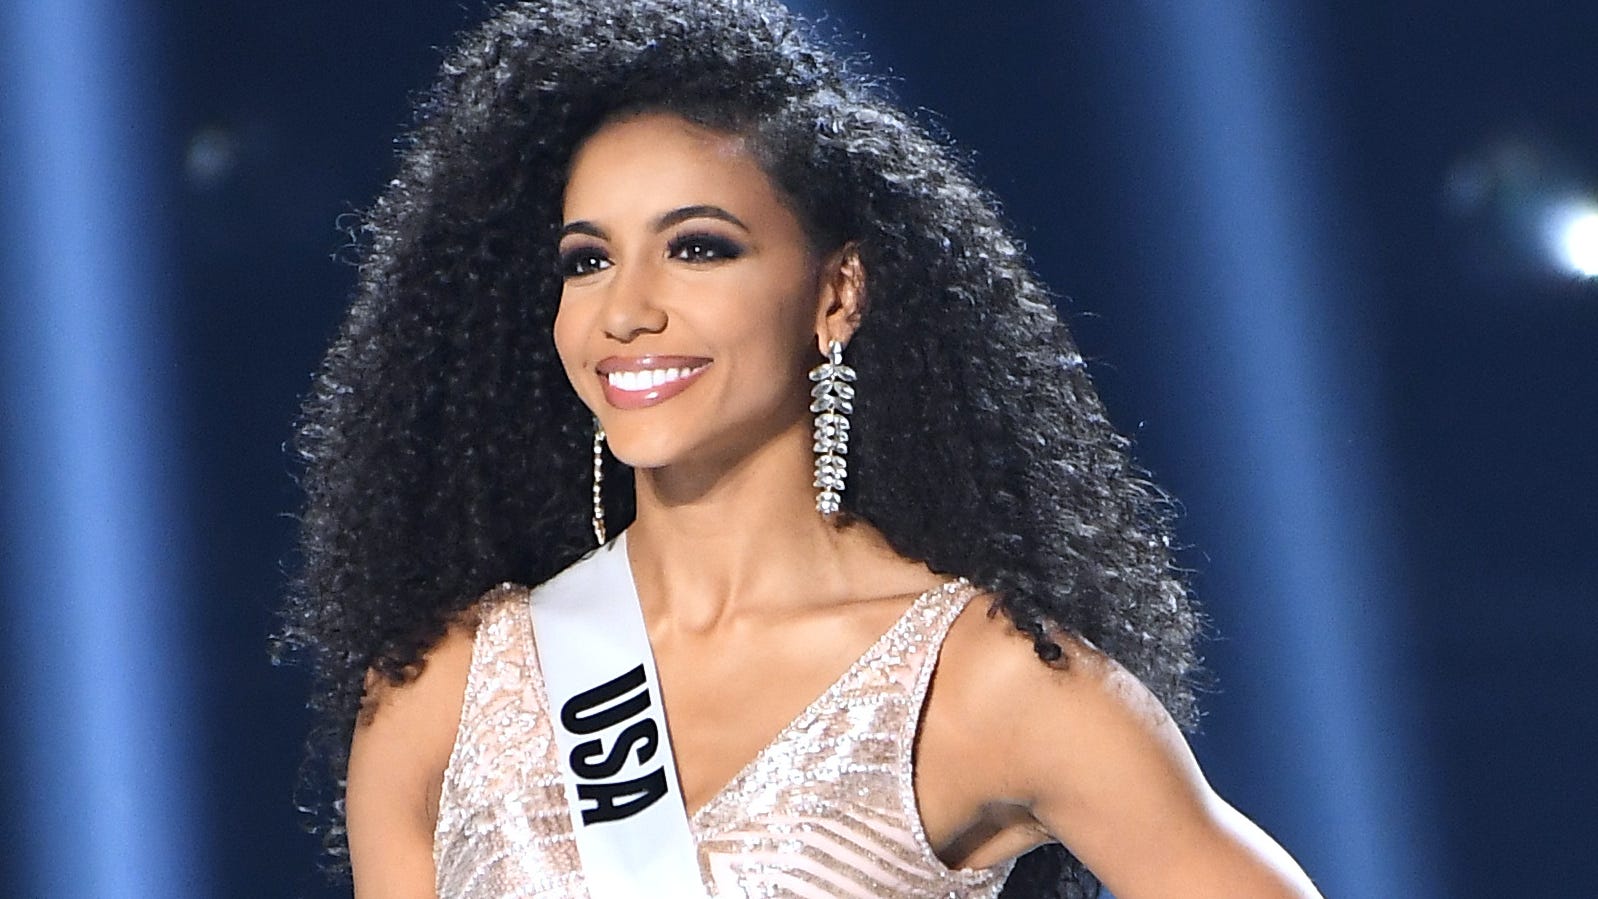 Miss USA 2019 dies – reportedly jumped from apartment building